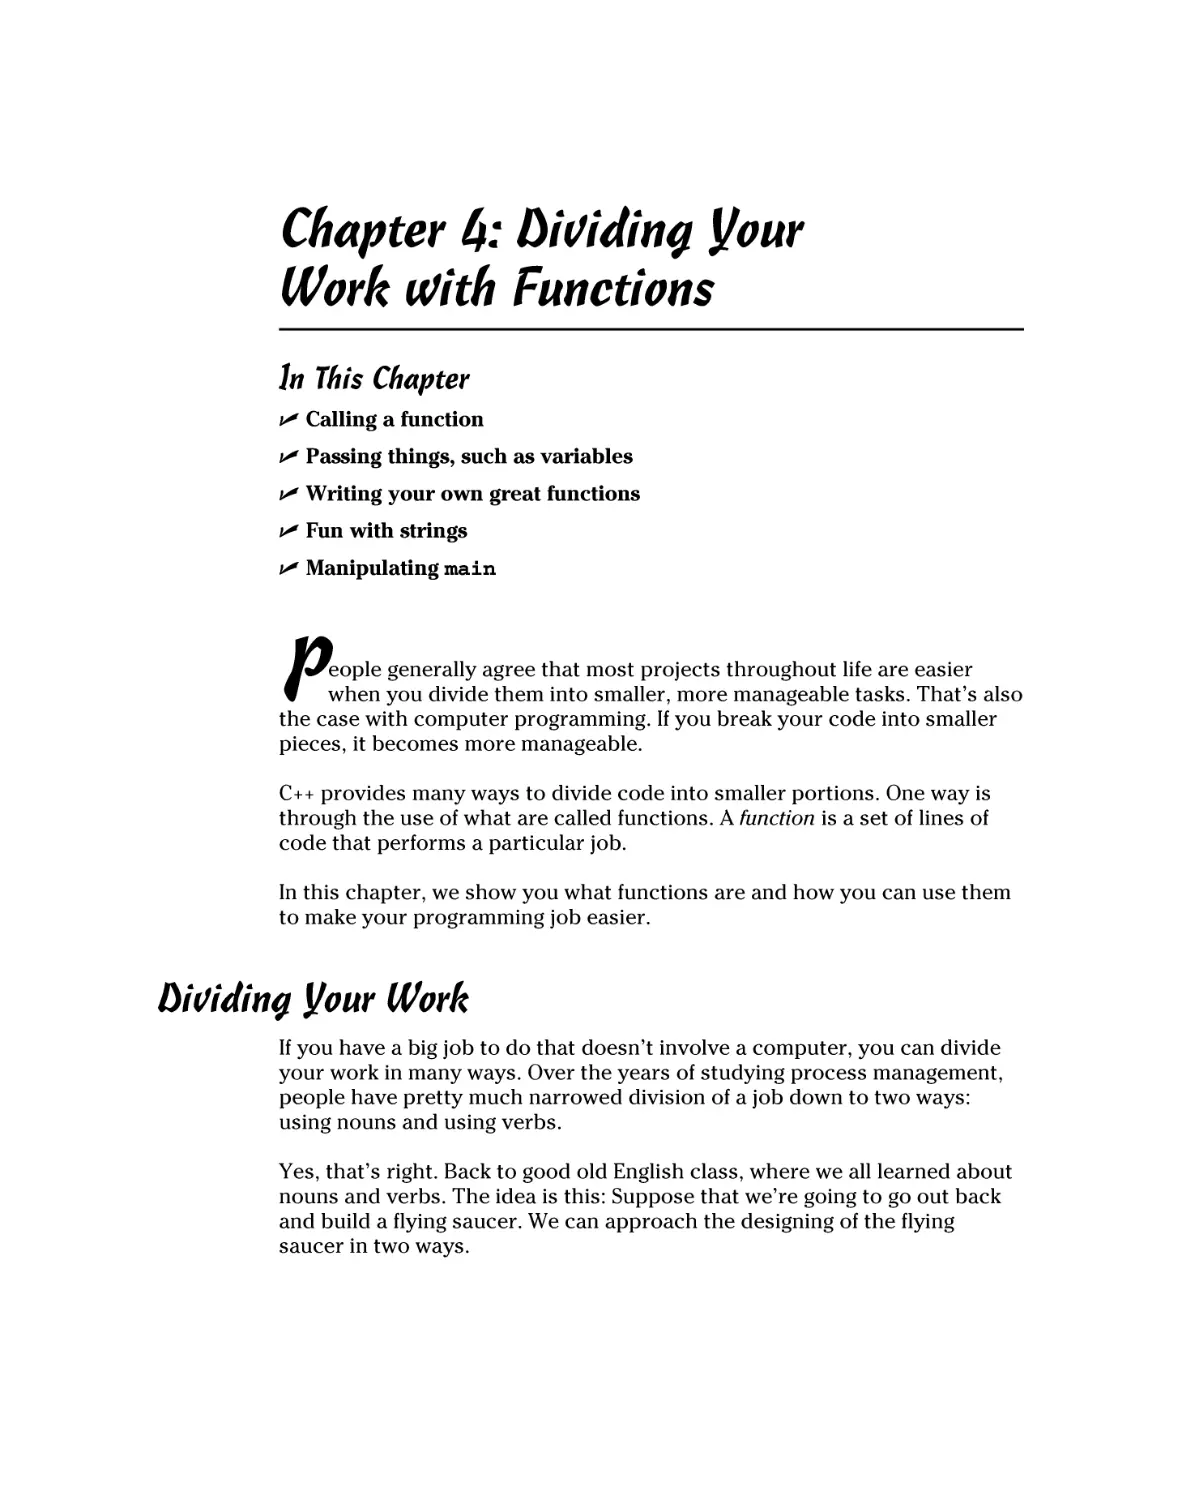 Chapter 4
Dividing Your Work